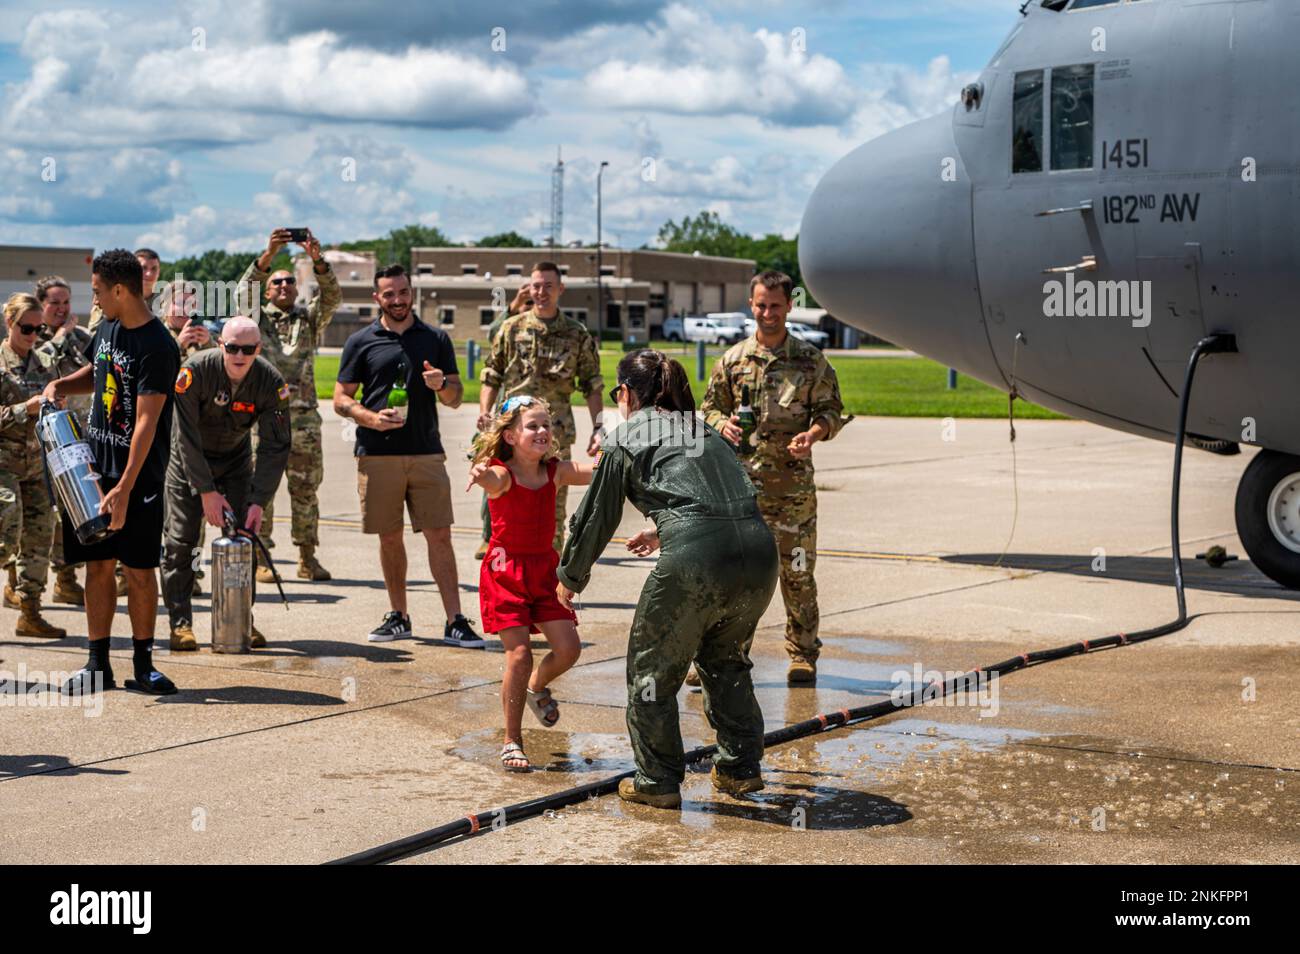 U.S. Air Force Lt. Col. Shannon Wrage, a navigator with the 169th Airlift Squadron, Illinois Air National Guard, greets her daughter after her “fini flight” at the 182nd Airlift Wing in Peoria, Illinois, Aug. 14, 2022. Wrage has 26 years of military service. Stock Photo